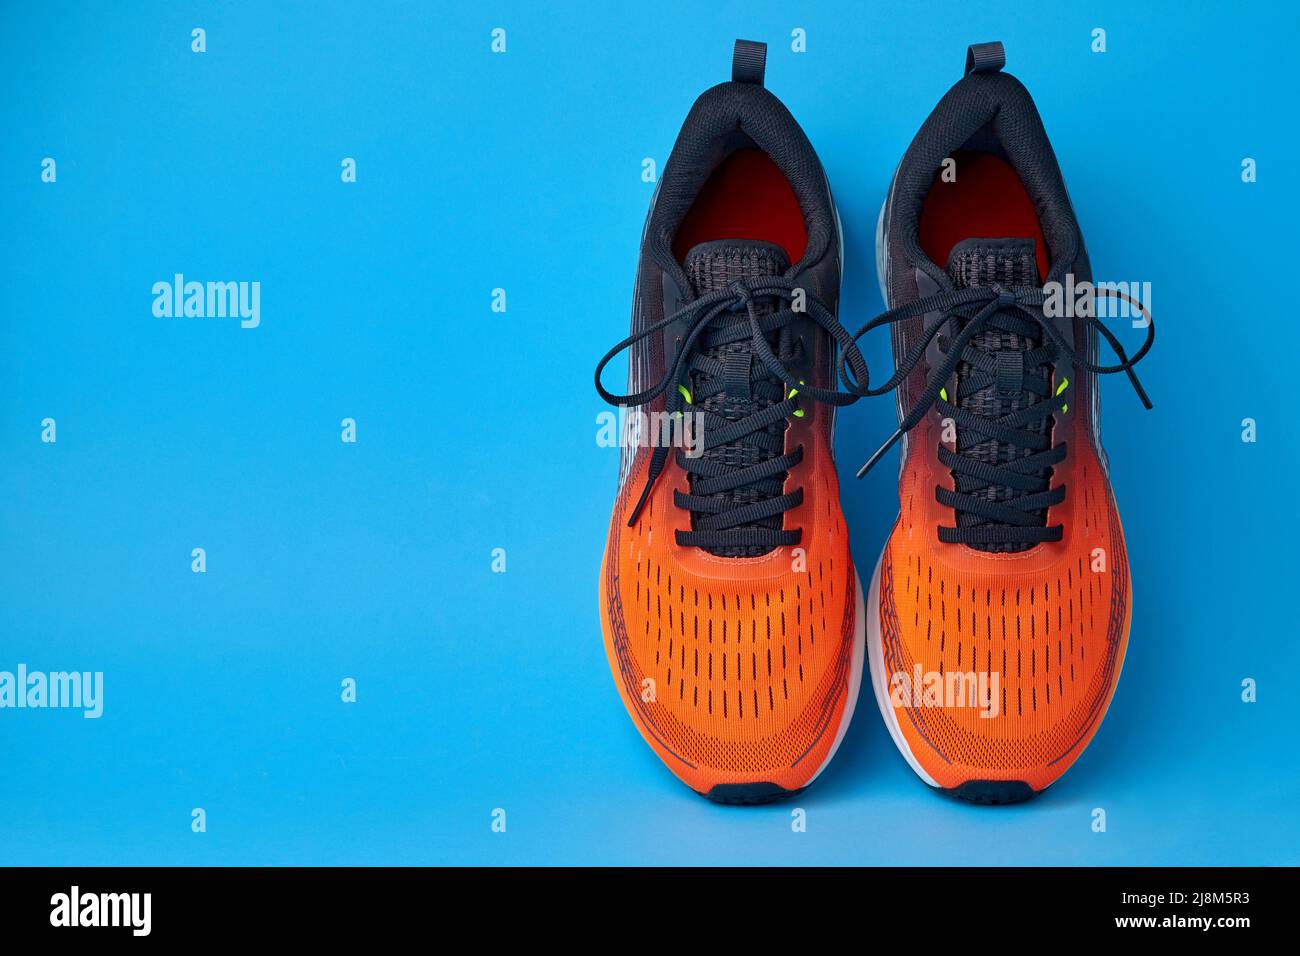 Orange sneakers on a blue background with copy space. Shoes for jogging, running, fitness, physical training Stock Photo